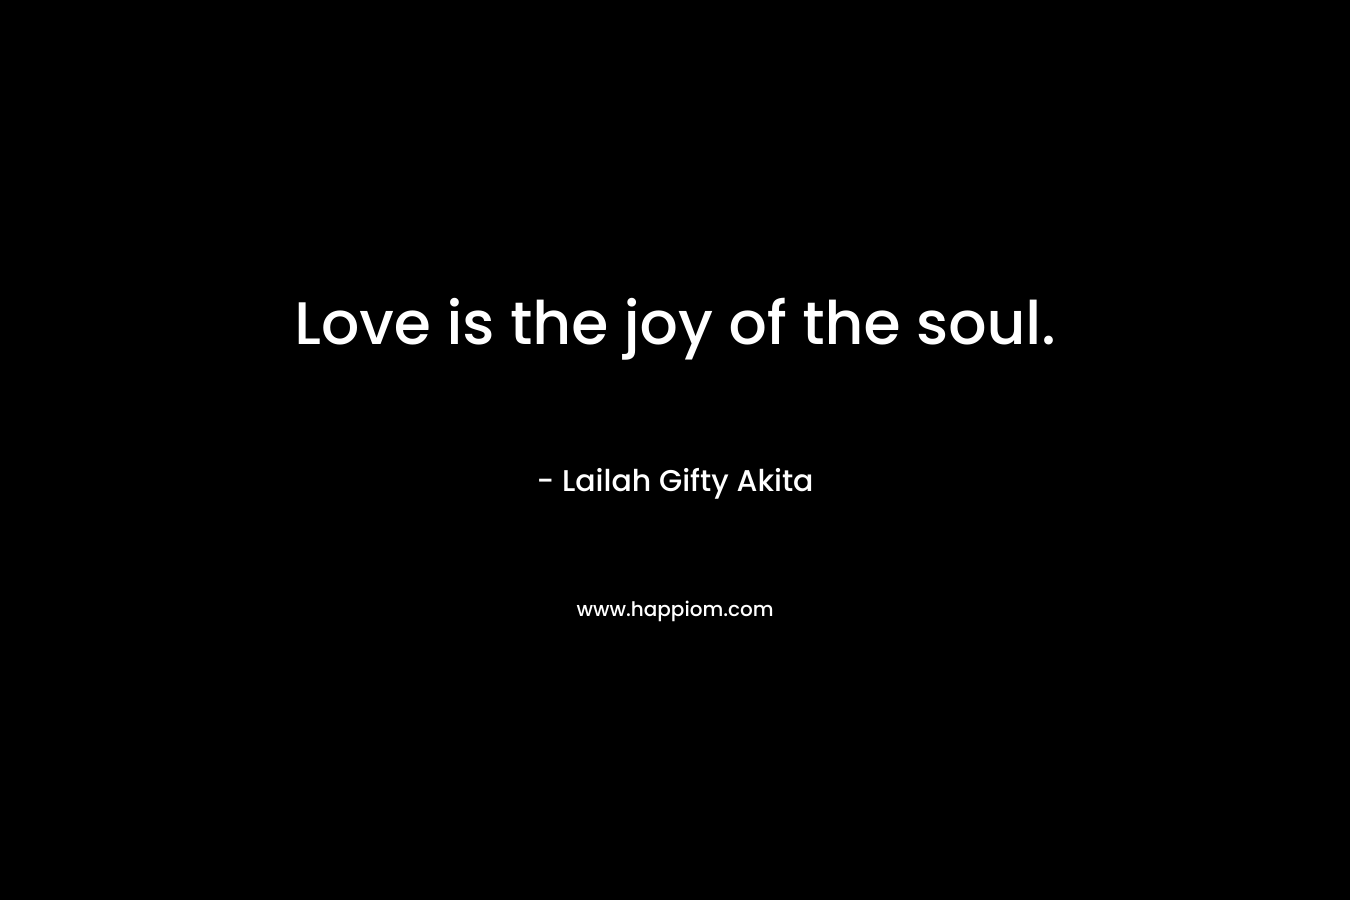 Love is the joy of the soul.